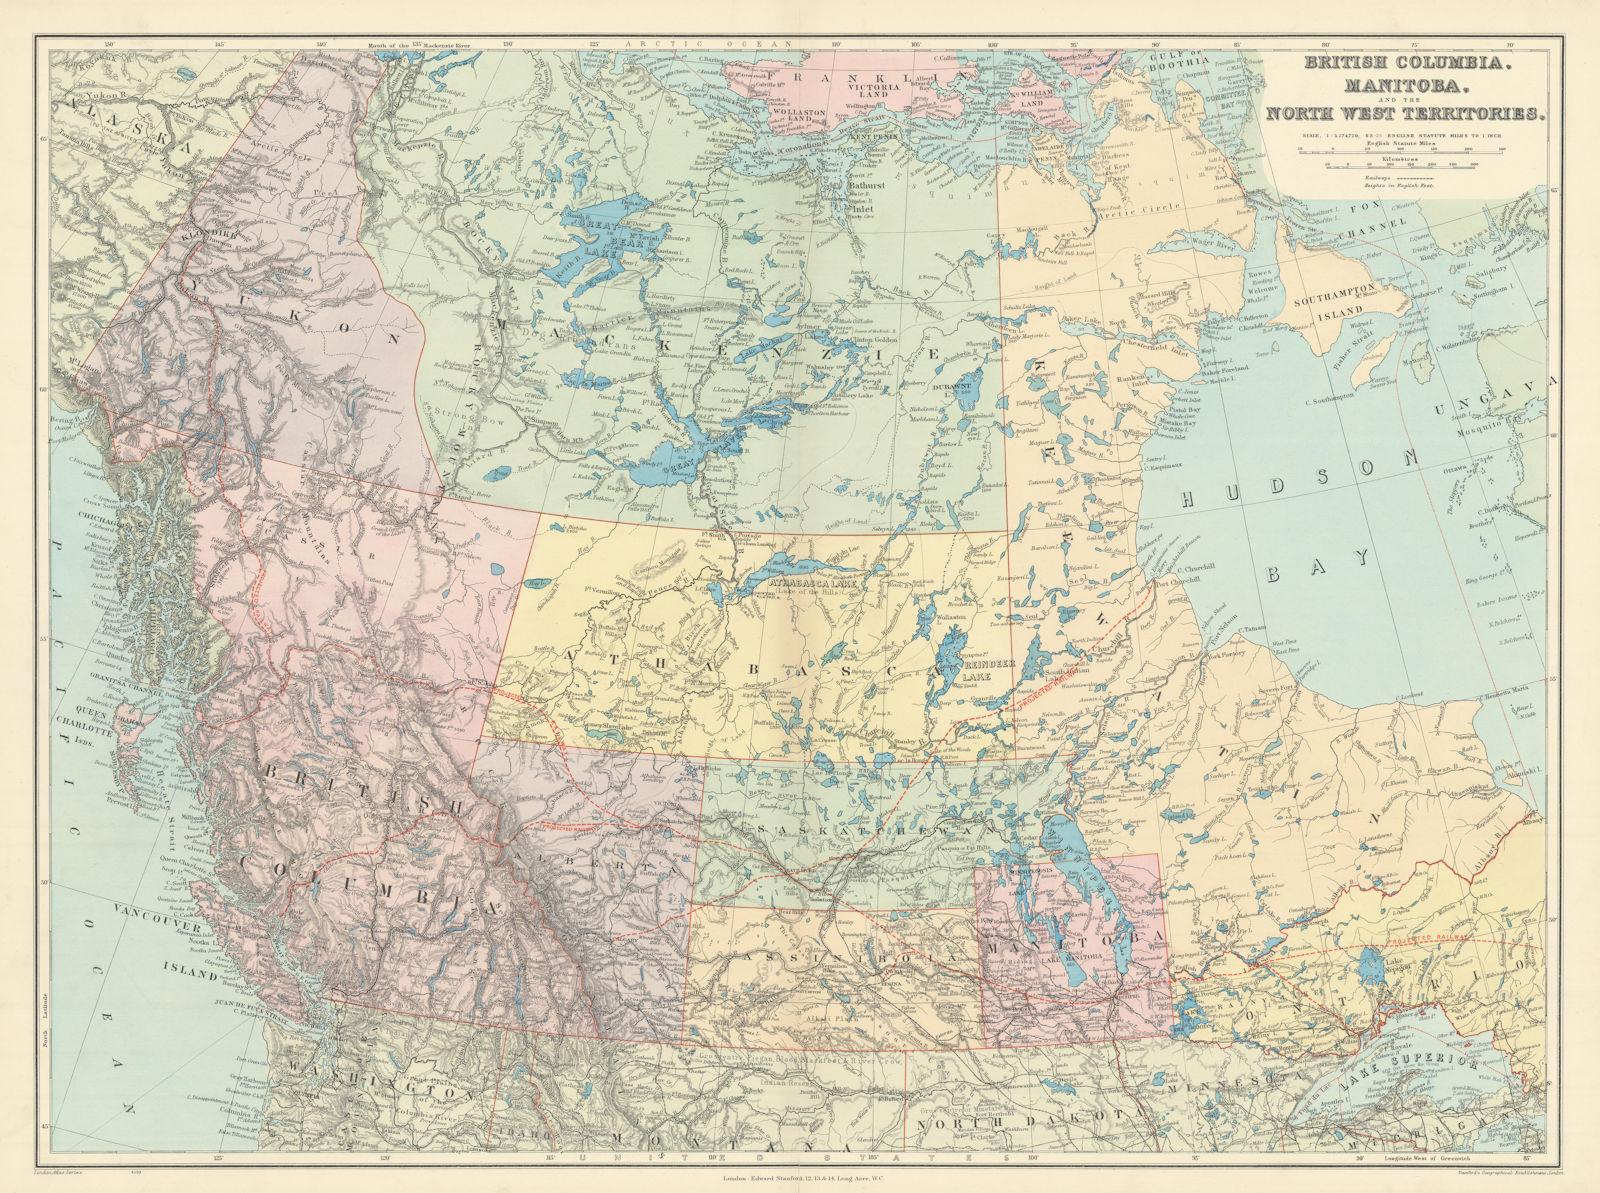 Associate Product British Columbia & Northwest Territory. Manitoba Canada. STANFORD 1904 old map